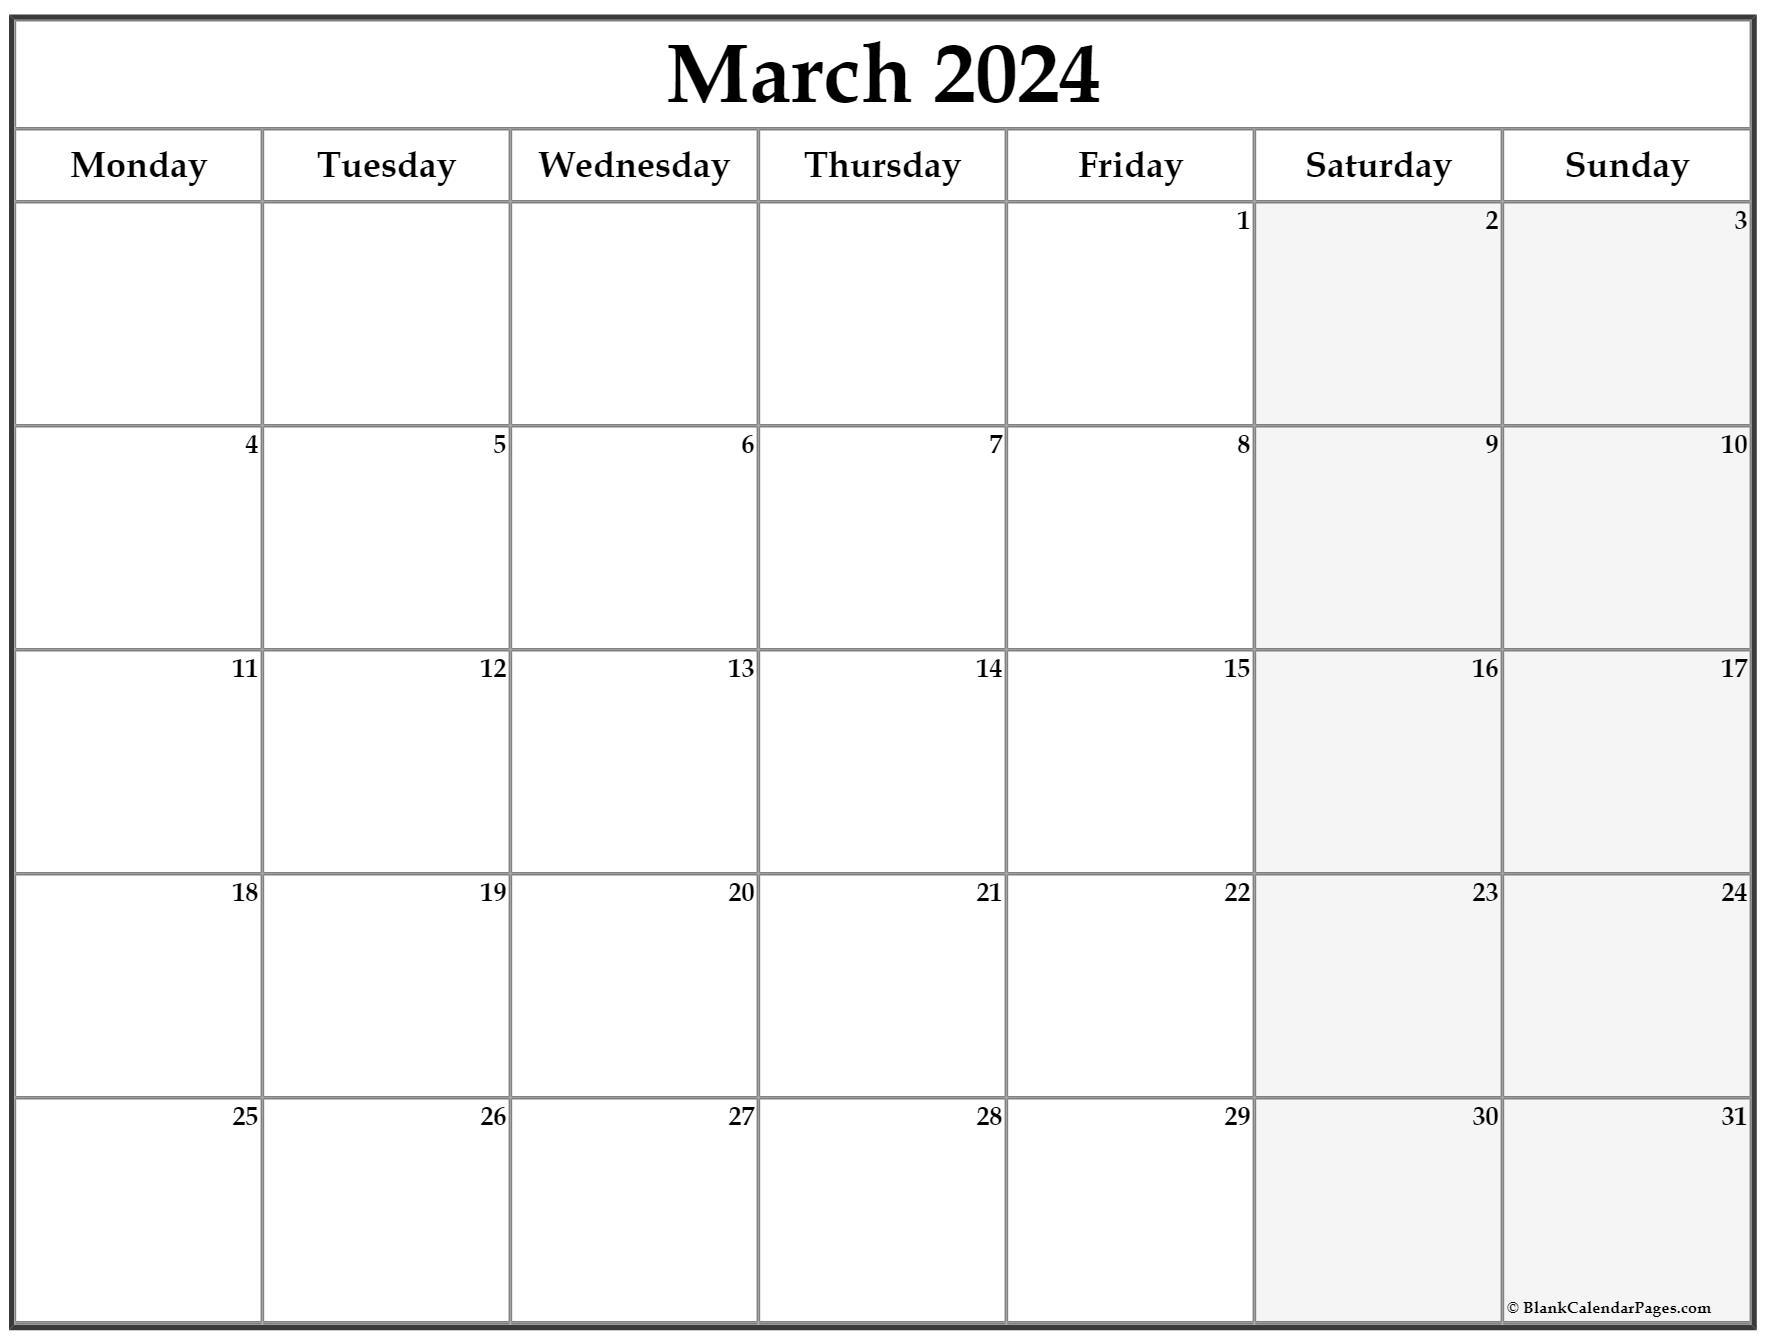 march-2024-calendar-with-to-do-list-calendar-quickly-bank2home